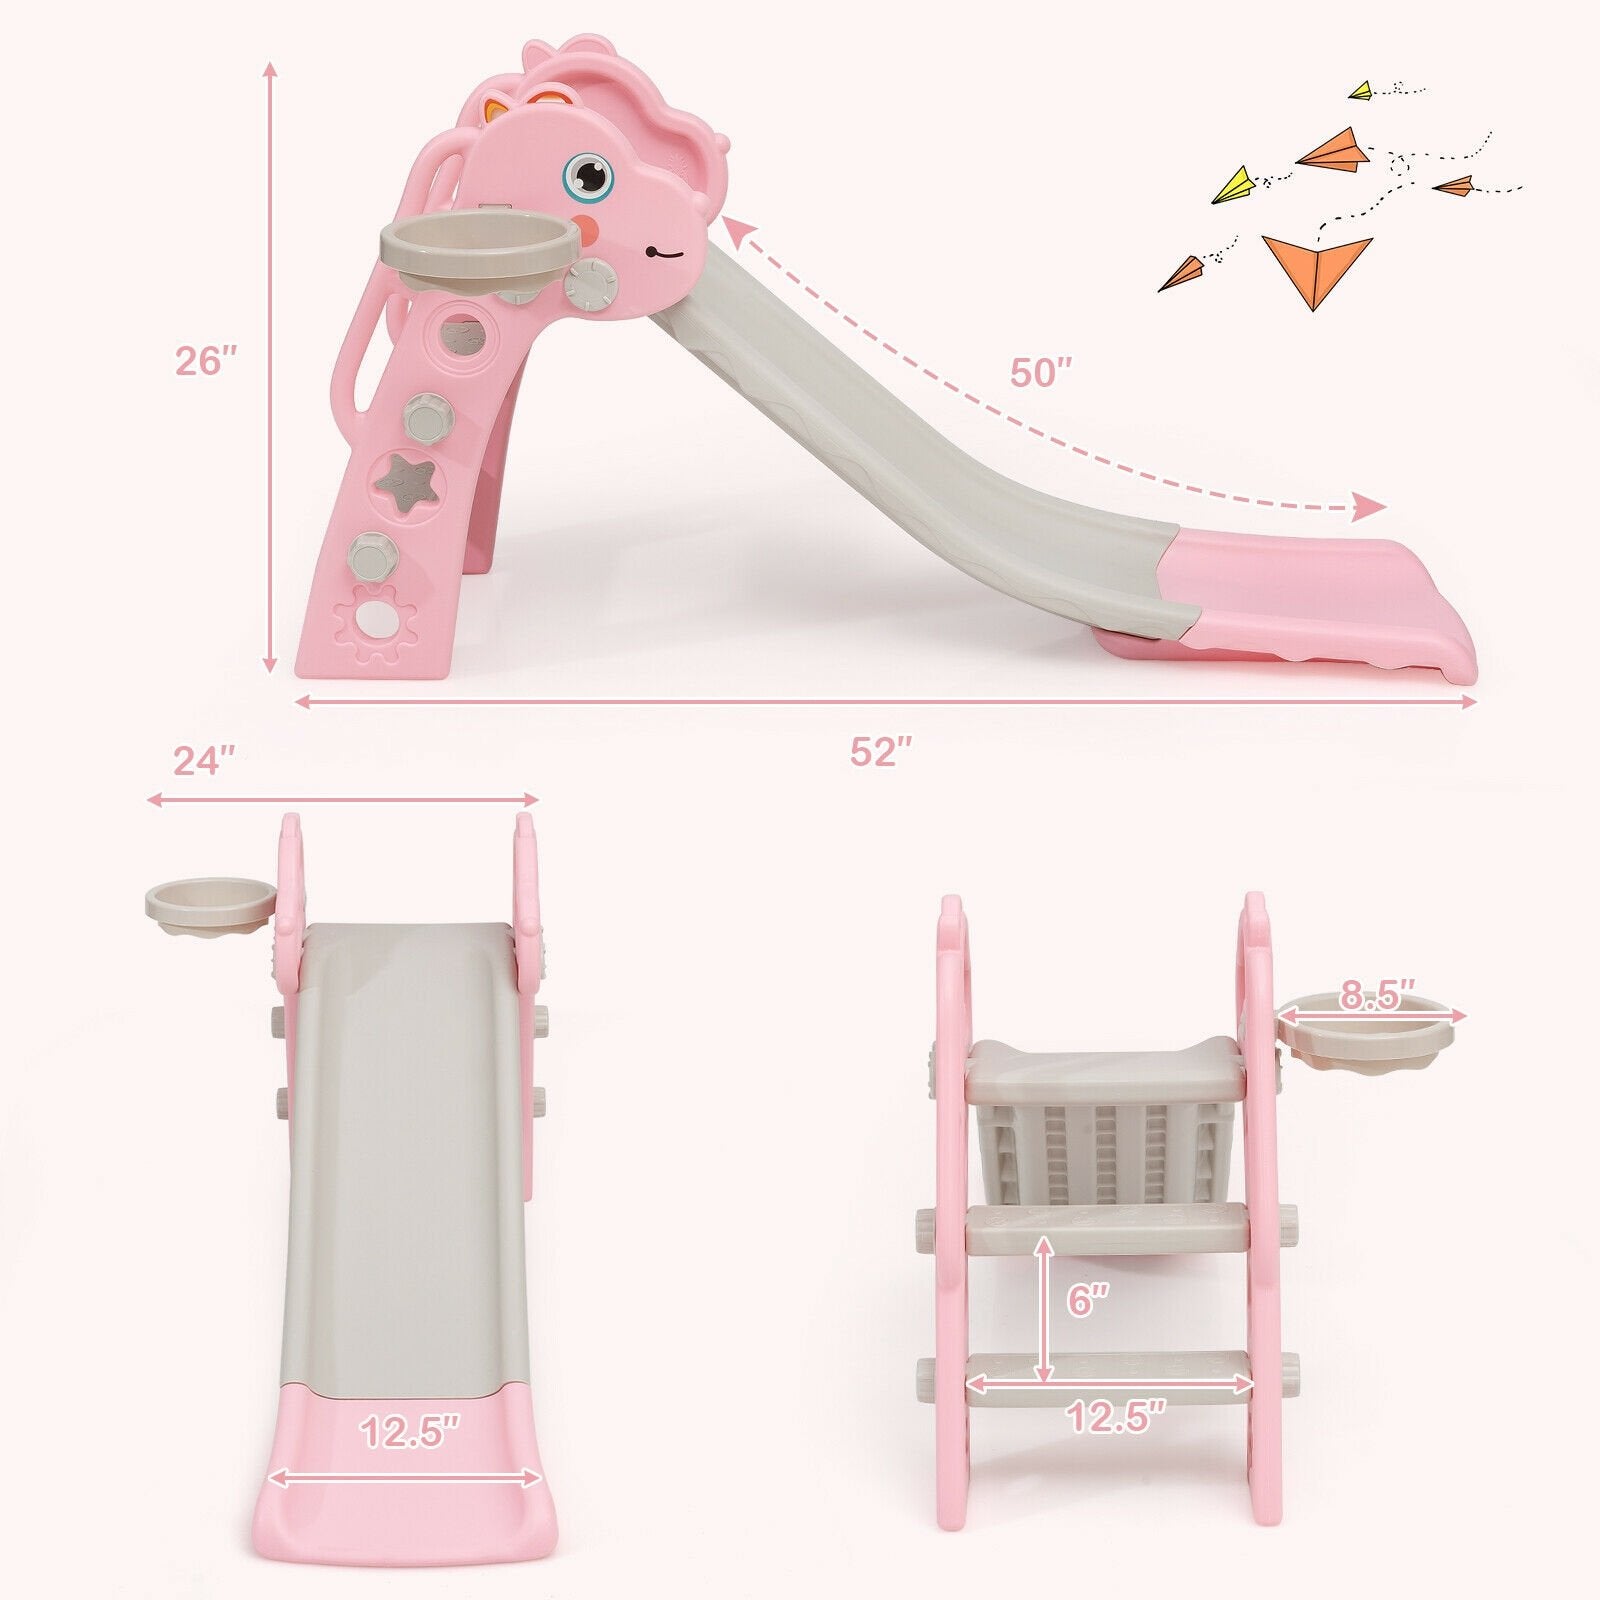 3-in-1 Kids Slide Baby Play Climber Slide Set with Basketball Hoop, Pink - Gallery Canada